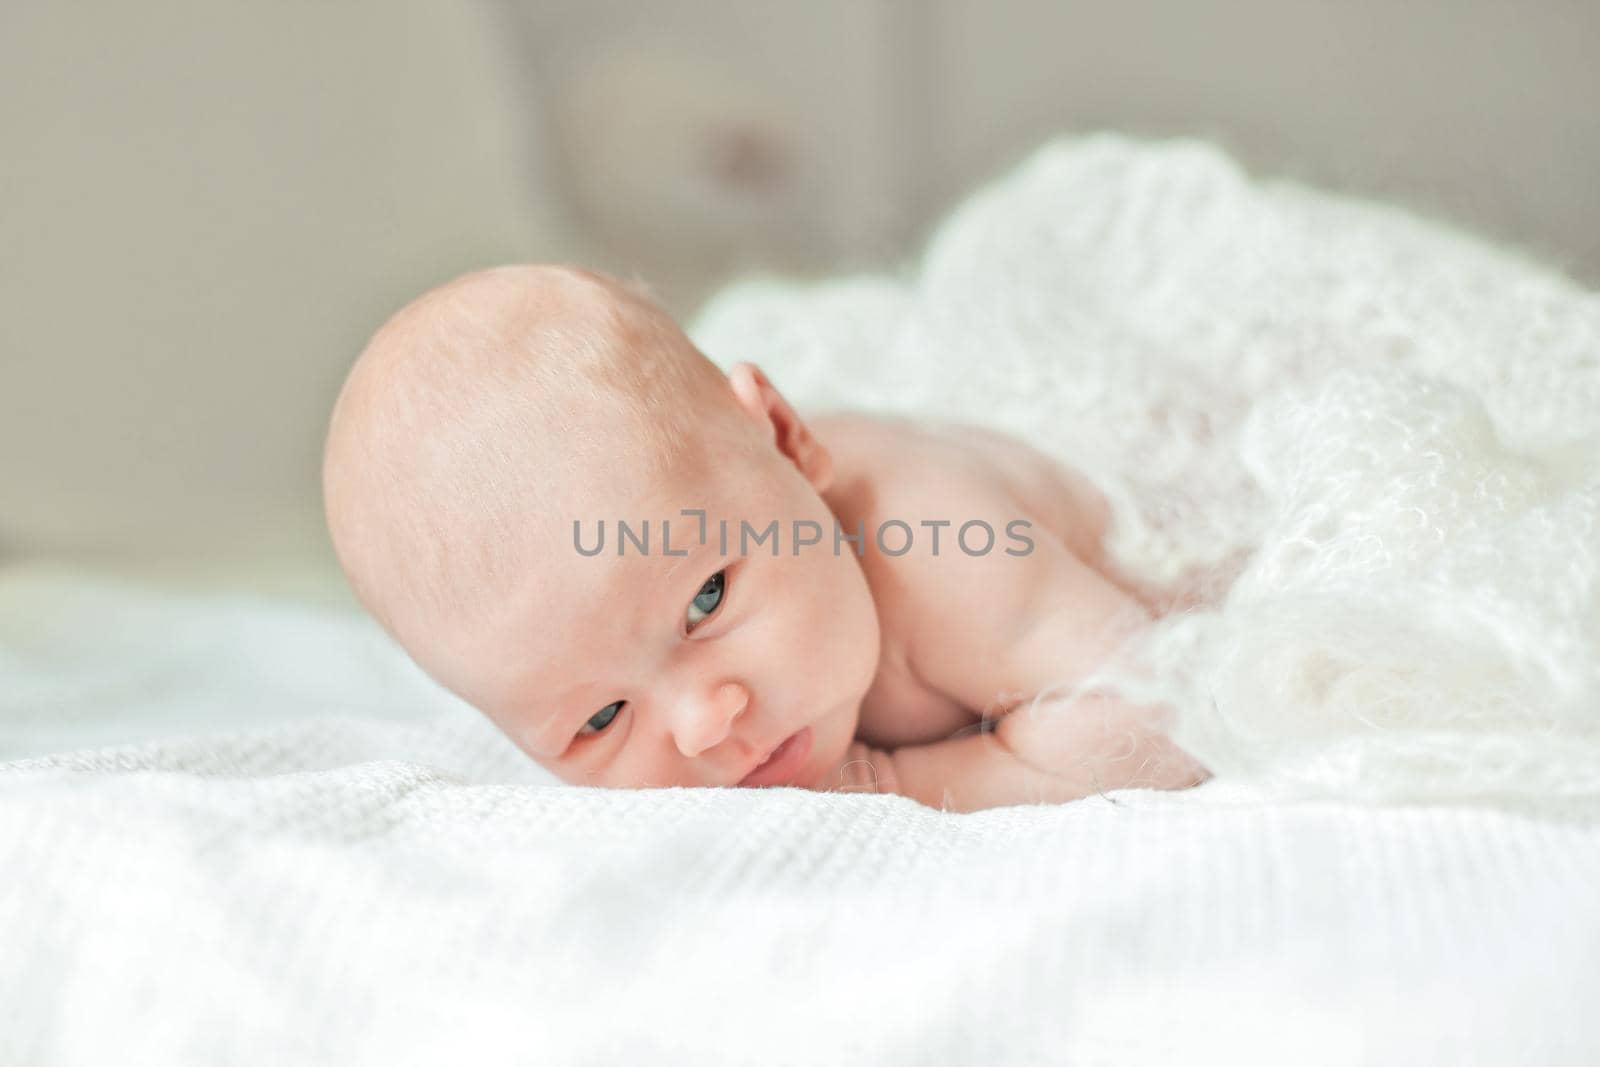 pretty newborn girl lying on her tummy on a blanket. photo with copy space